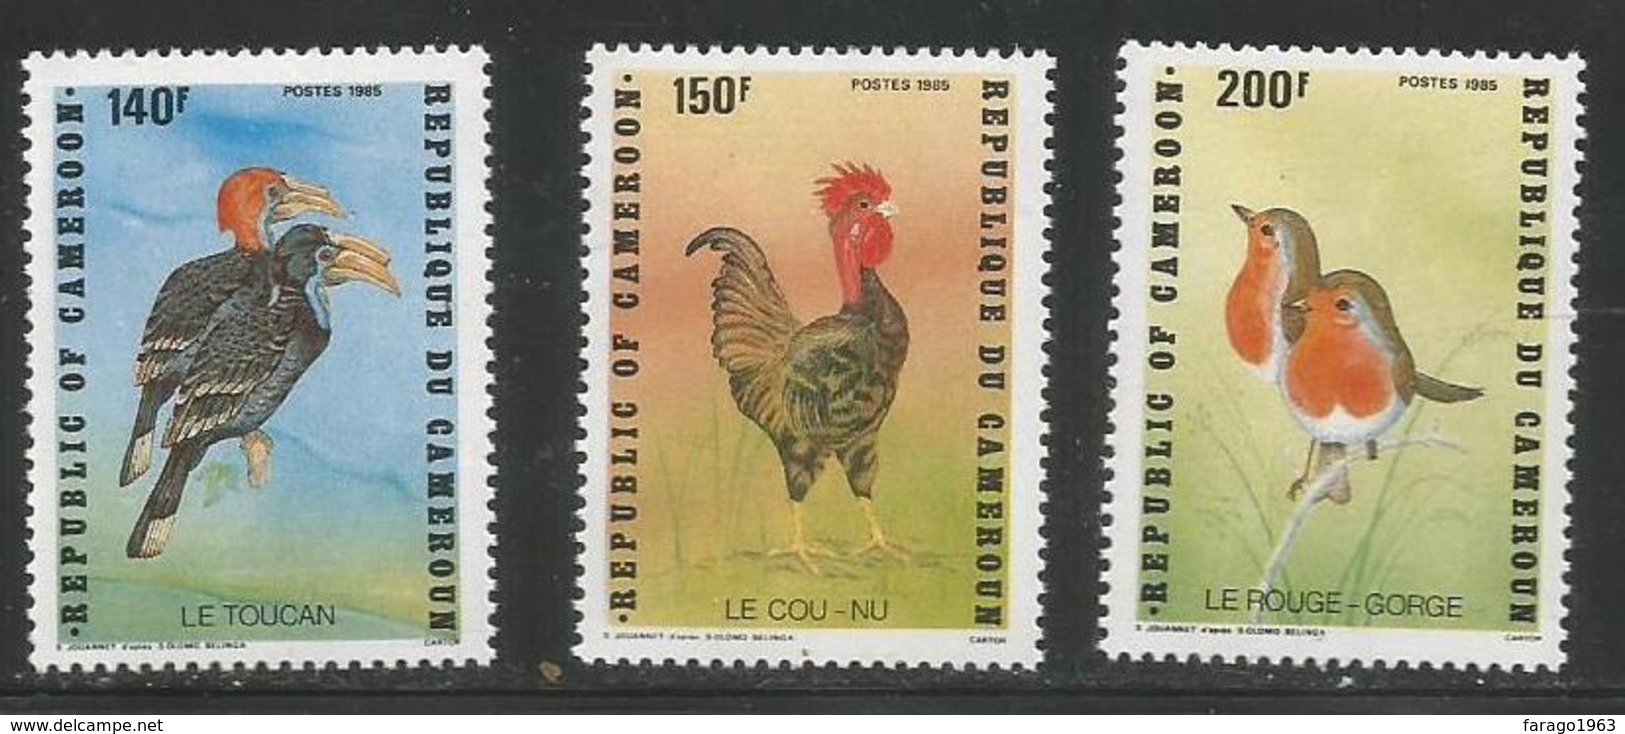 1985 Cameroun Cameroon Birds Toucan Rooster Cockrel Complete Set Of 3 MNH - Cameroon (1960-...)